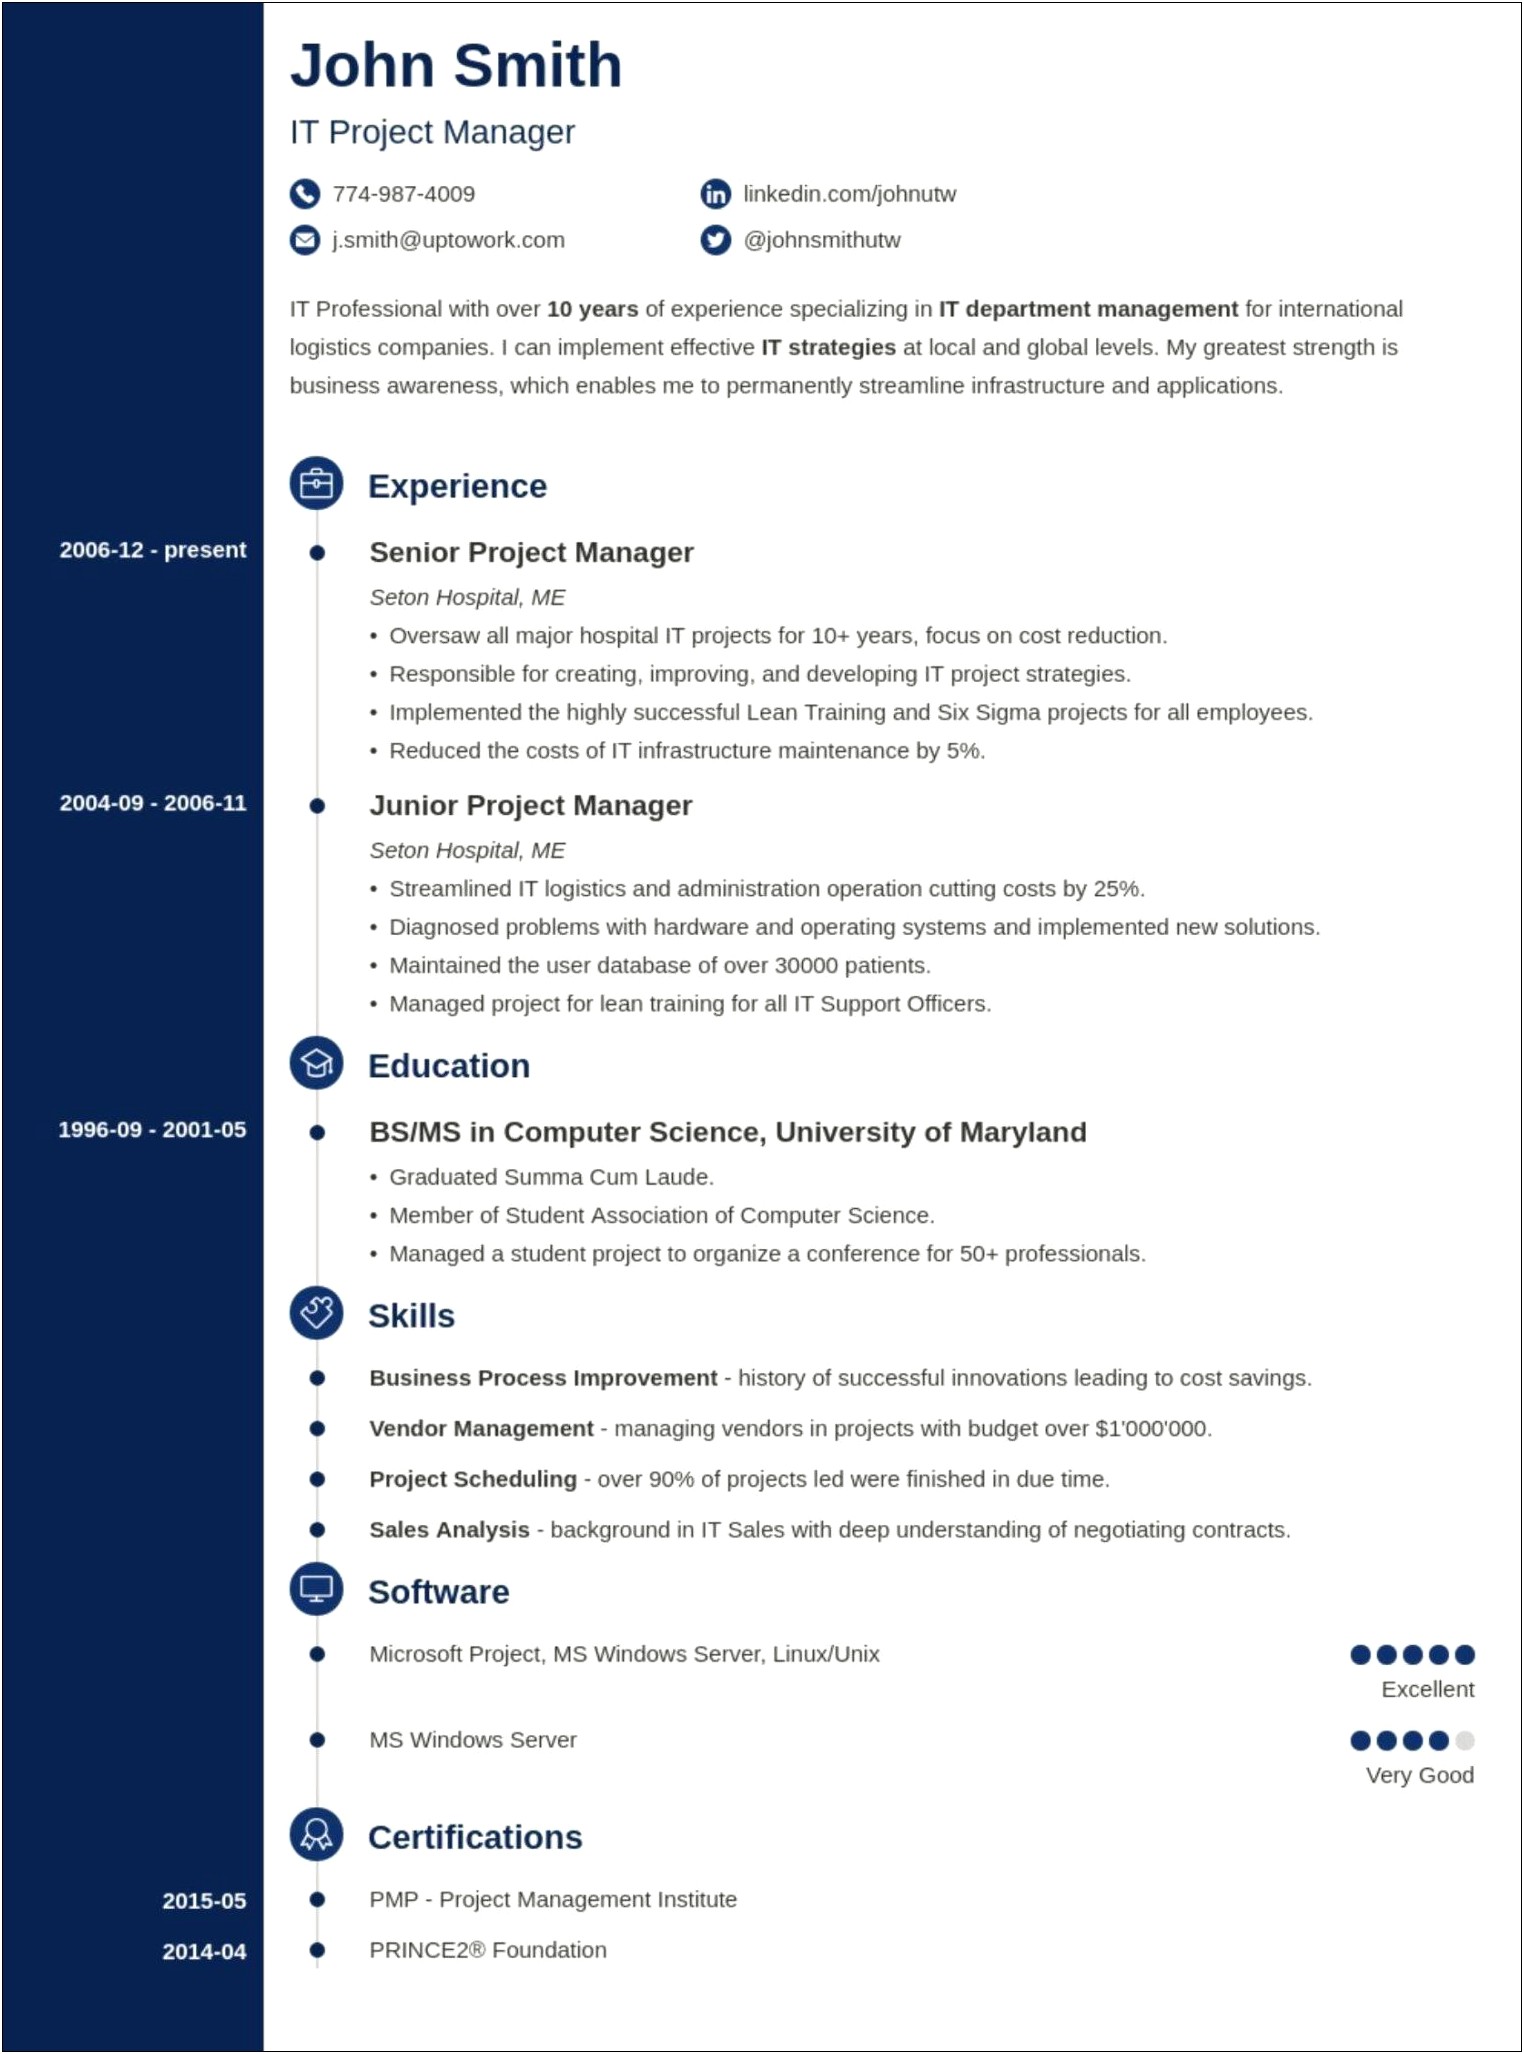 Sample Resume Objective Statements For Material Science Student